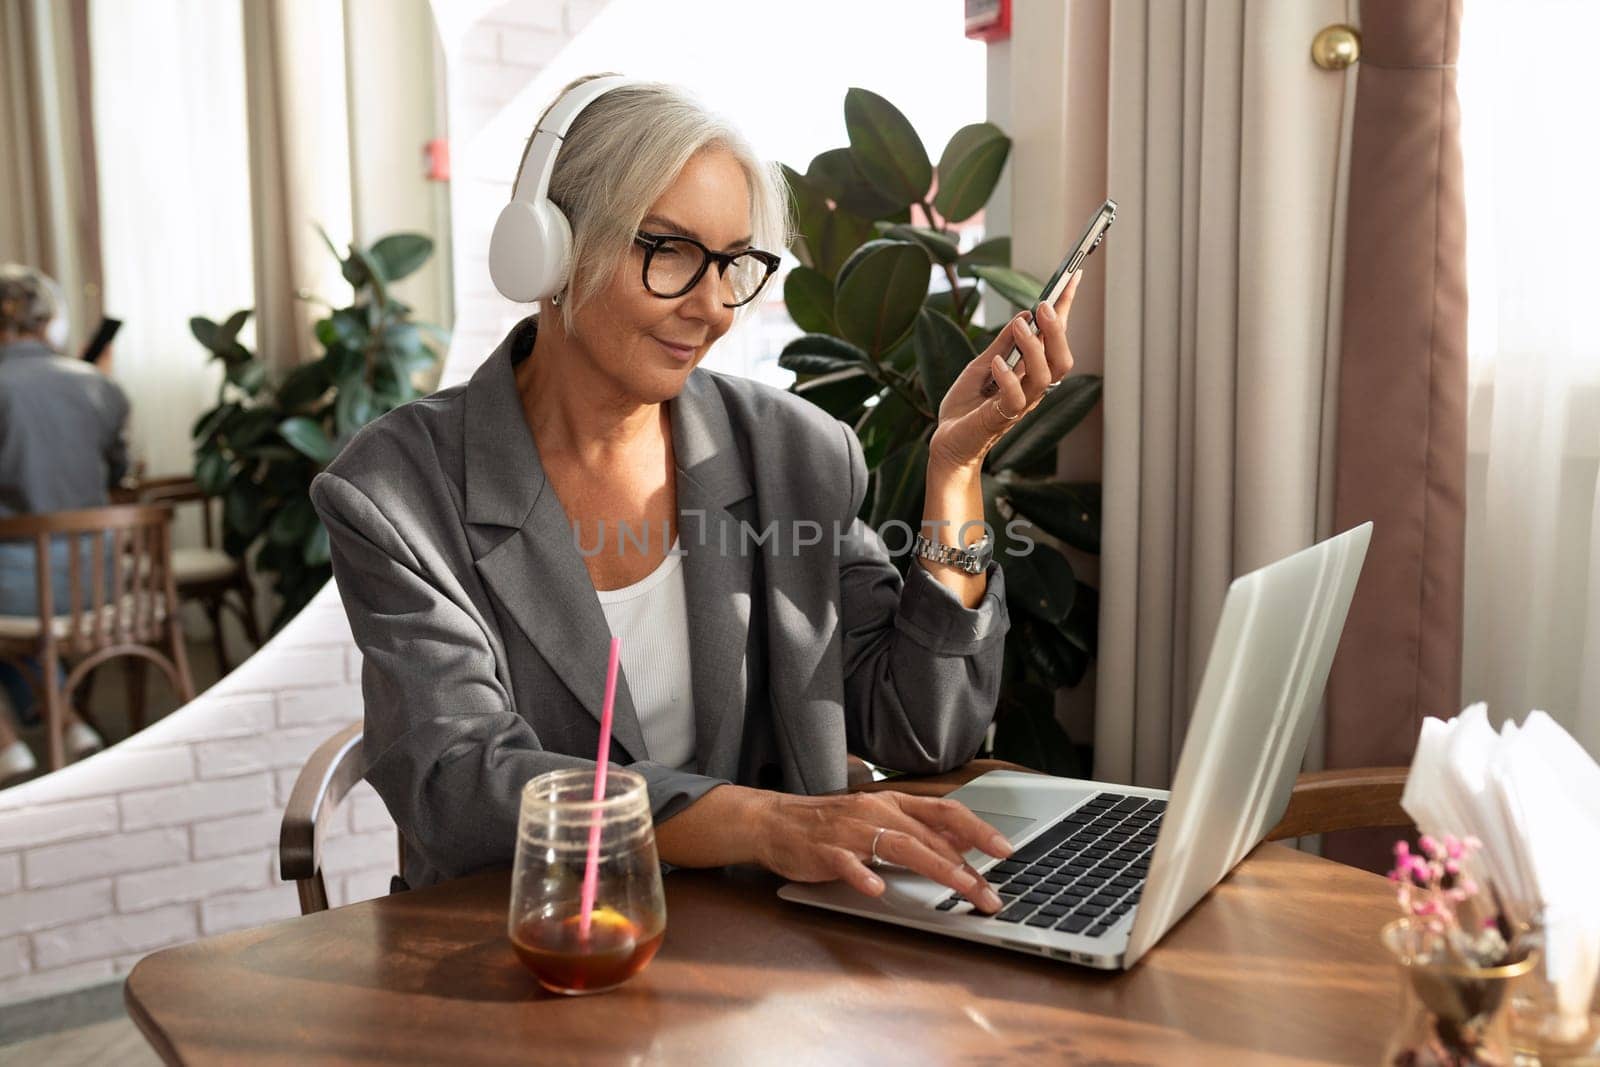 charming stylish mature business woman with glasses dressed in a gray jacket spends time in a cafe sitting with a laptop.